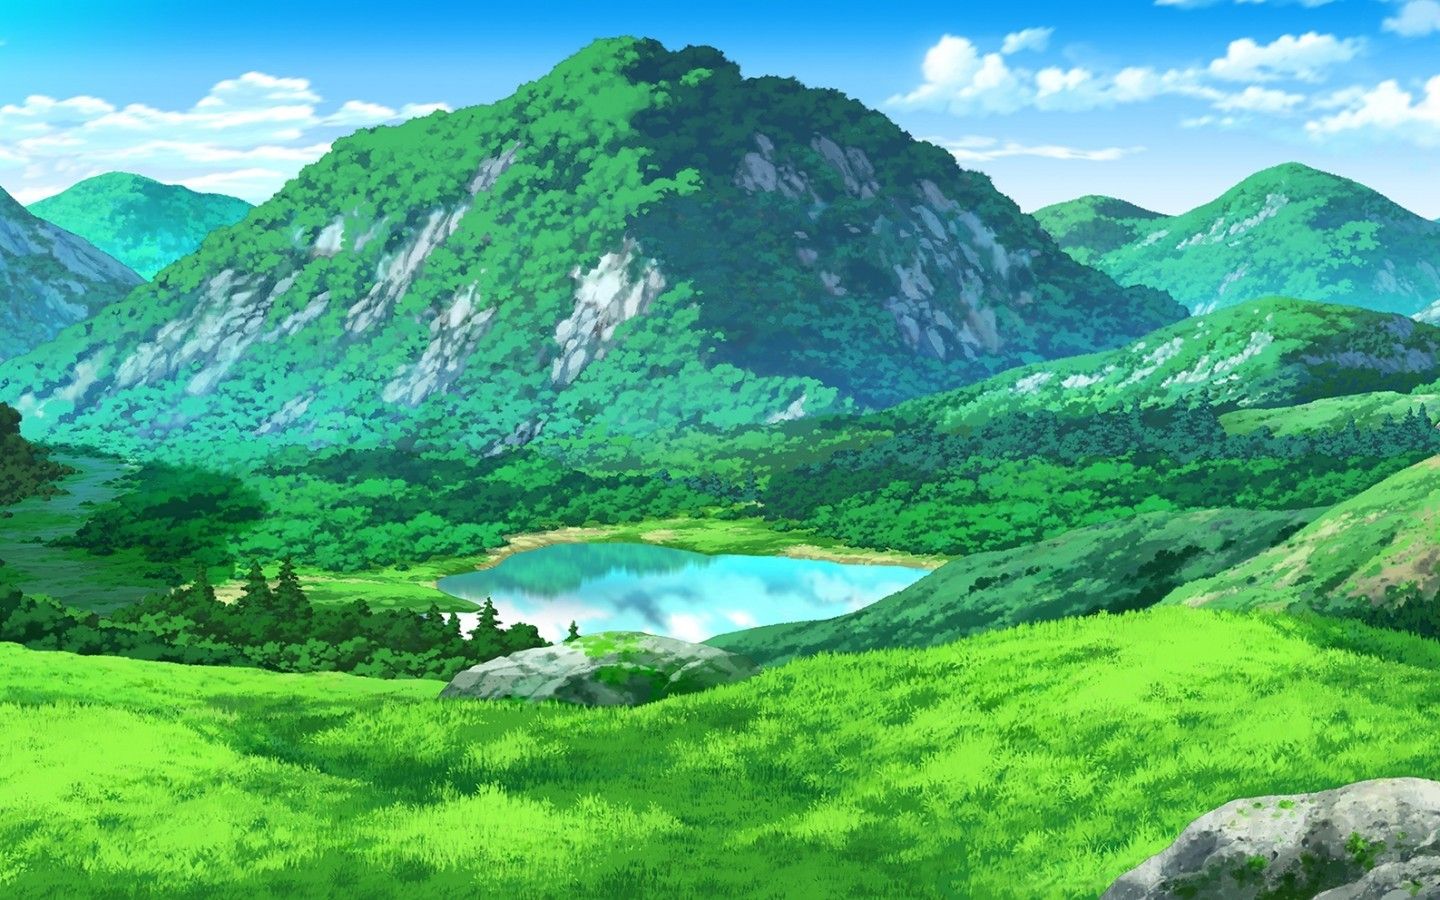 Anime Landscape: Green forest path (Anime Background) | Landscape background,  Anime scenery, Scenery background